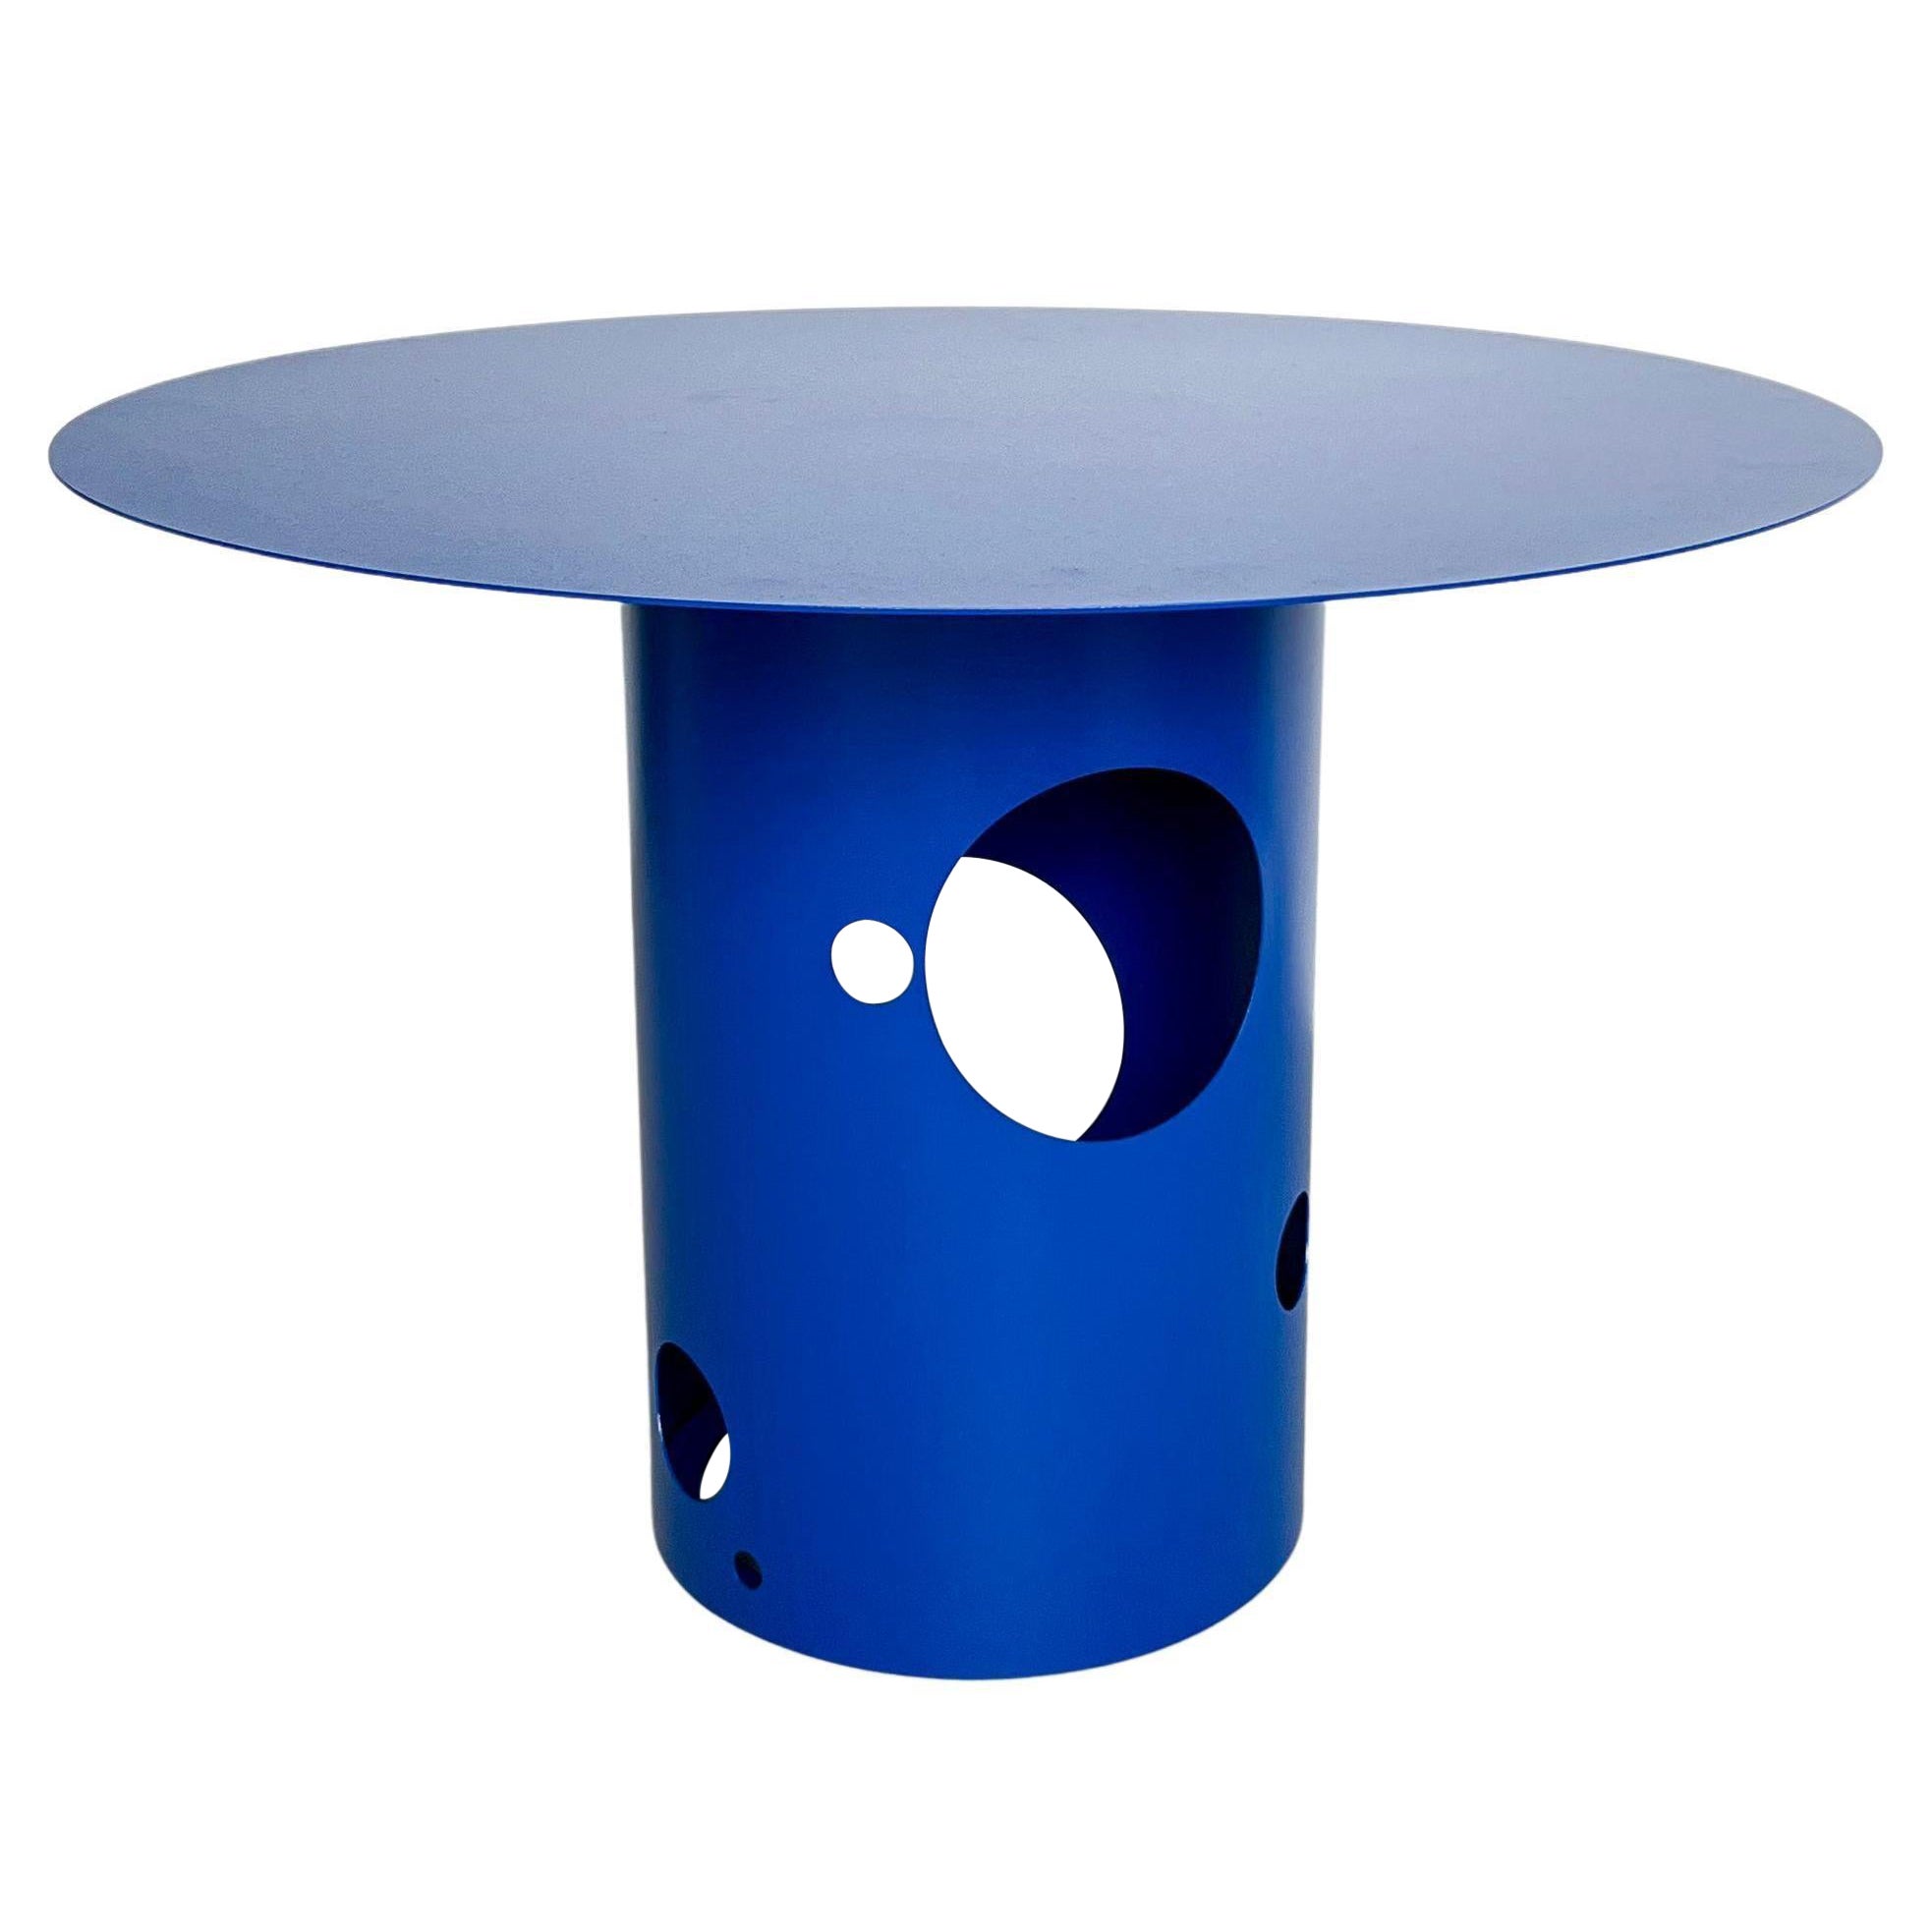 21st Century Contemporary Italian Silos Dining Table by Spinzi, Electric Blue For Sale